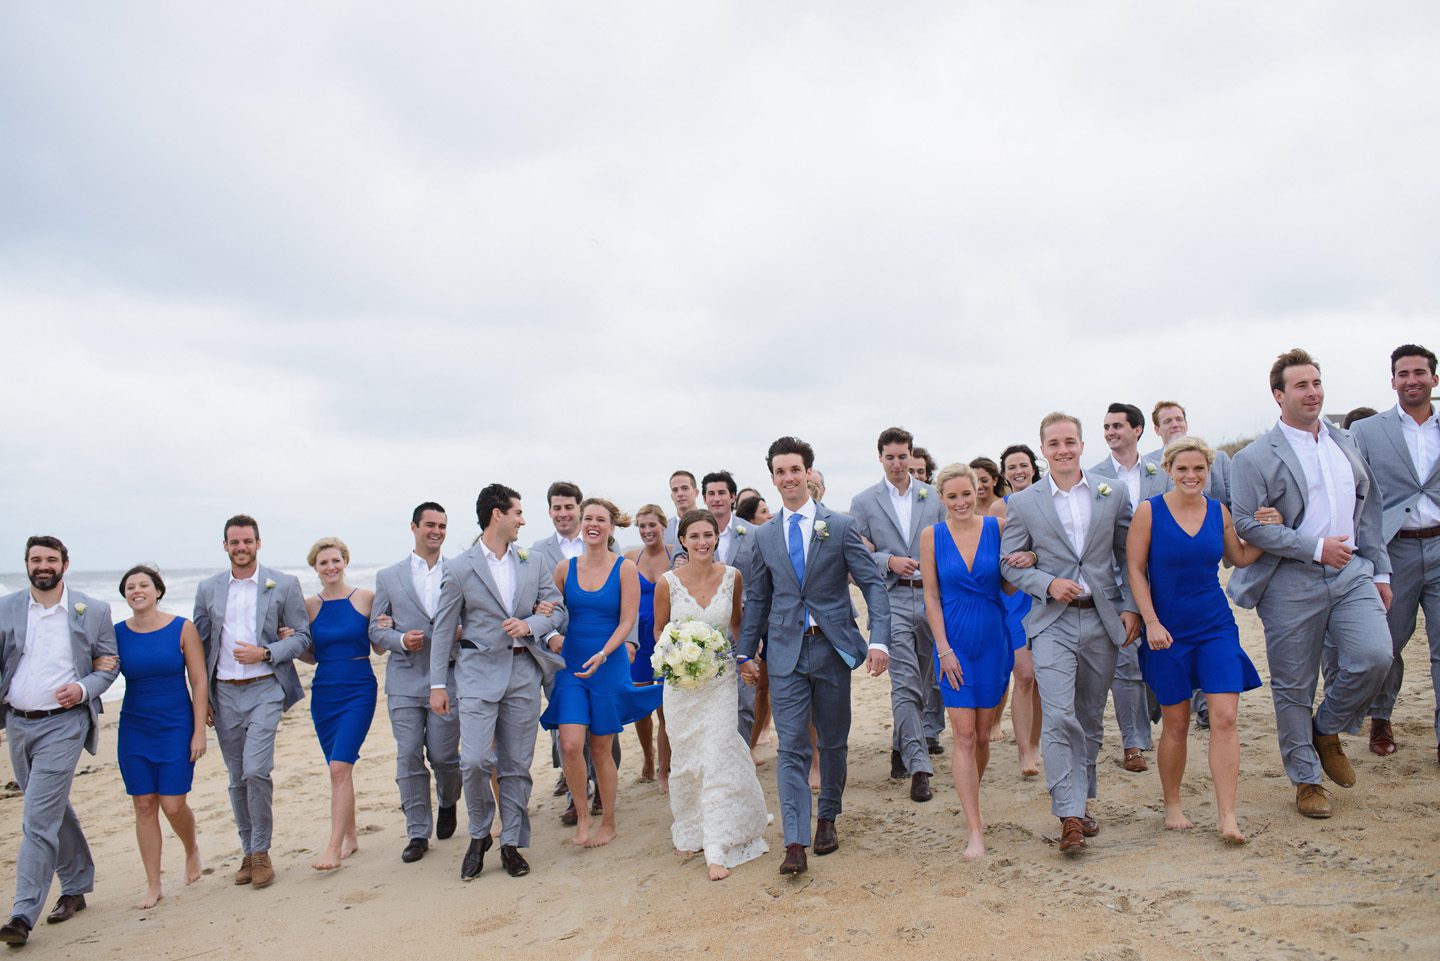 Sanderling Resort Outer Banks Wedding by Neil GT Photography Wedding Party Walking